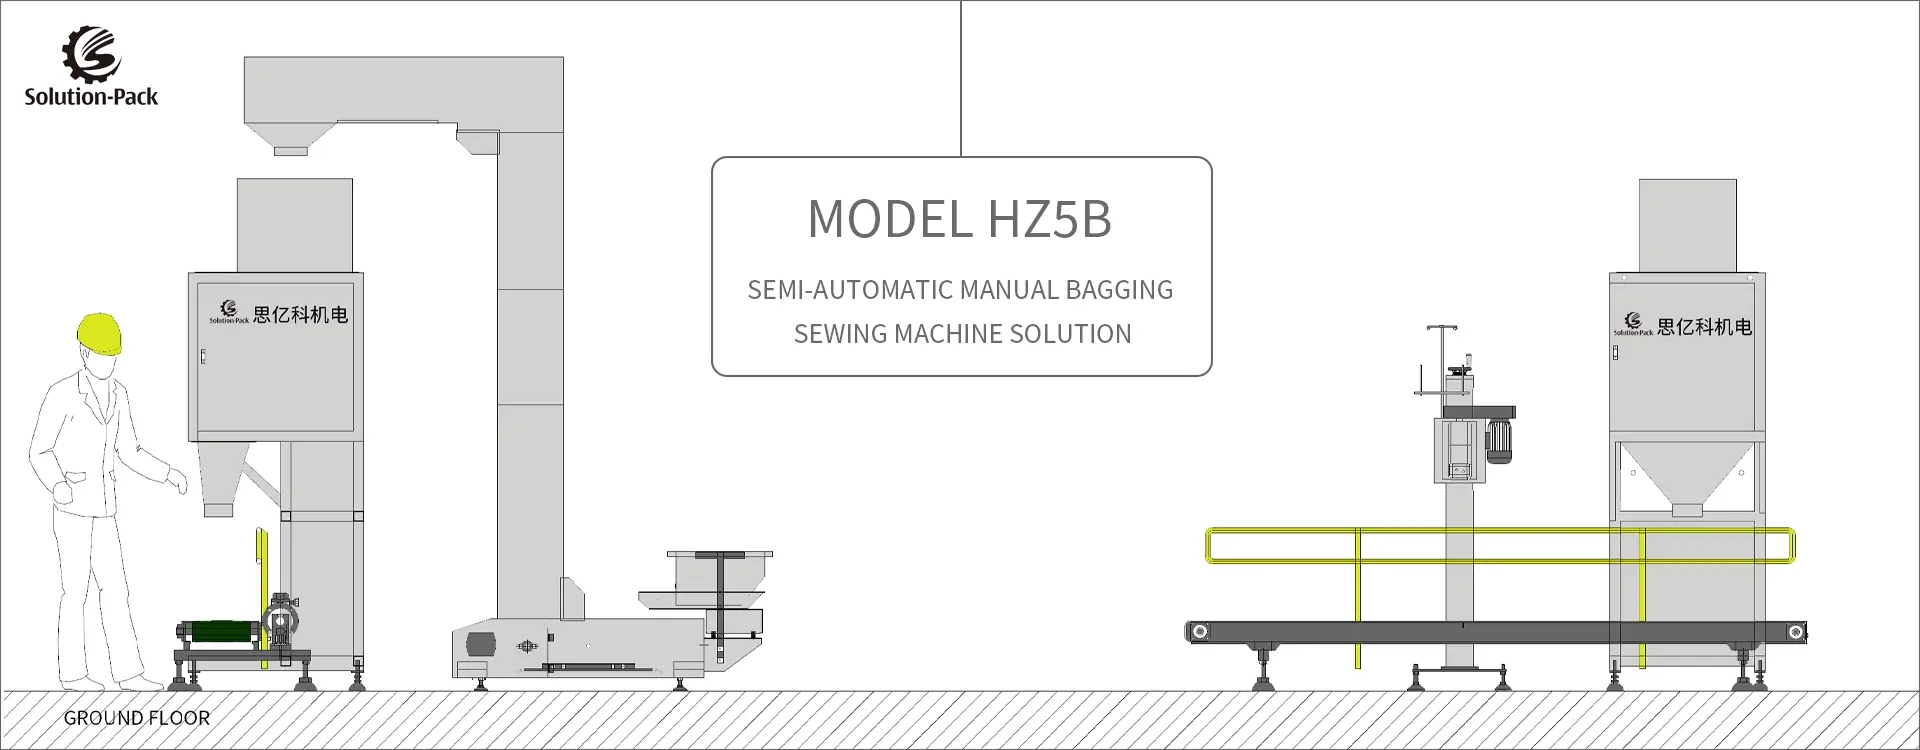 Model HZ5B Semi-Automatic Manual Bagging Machine Equipment Heading Banner Picture | Solution-Pack